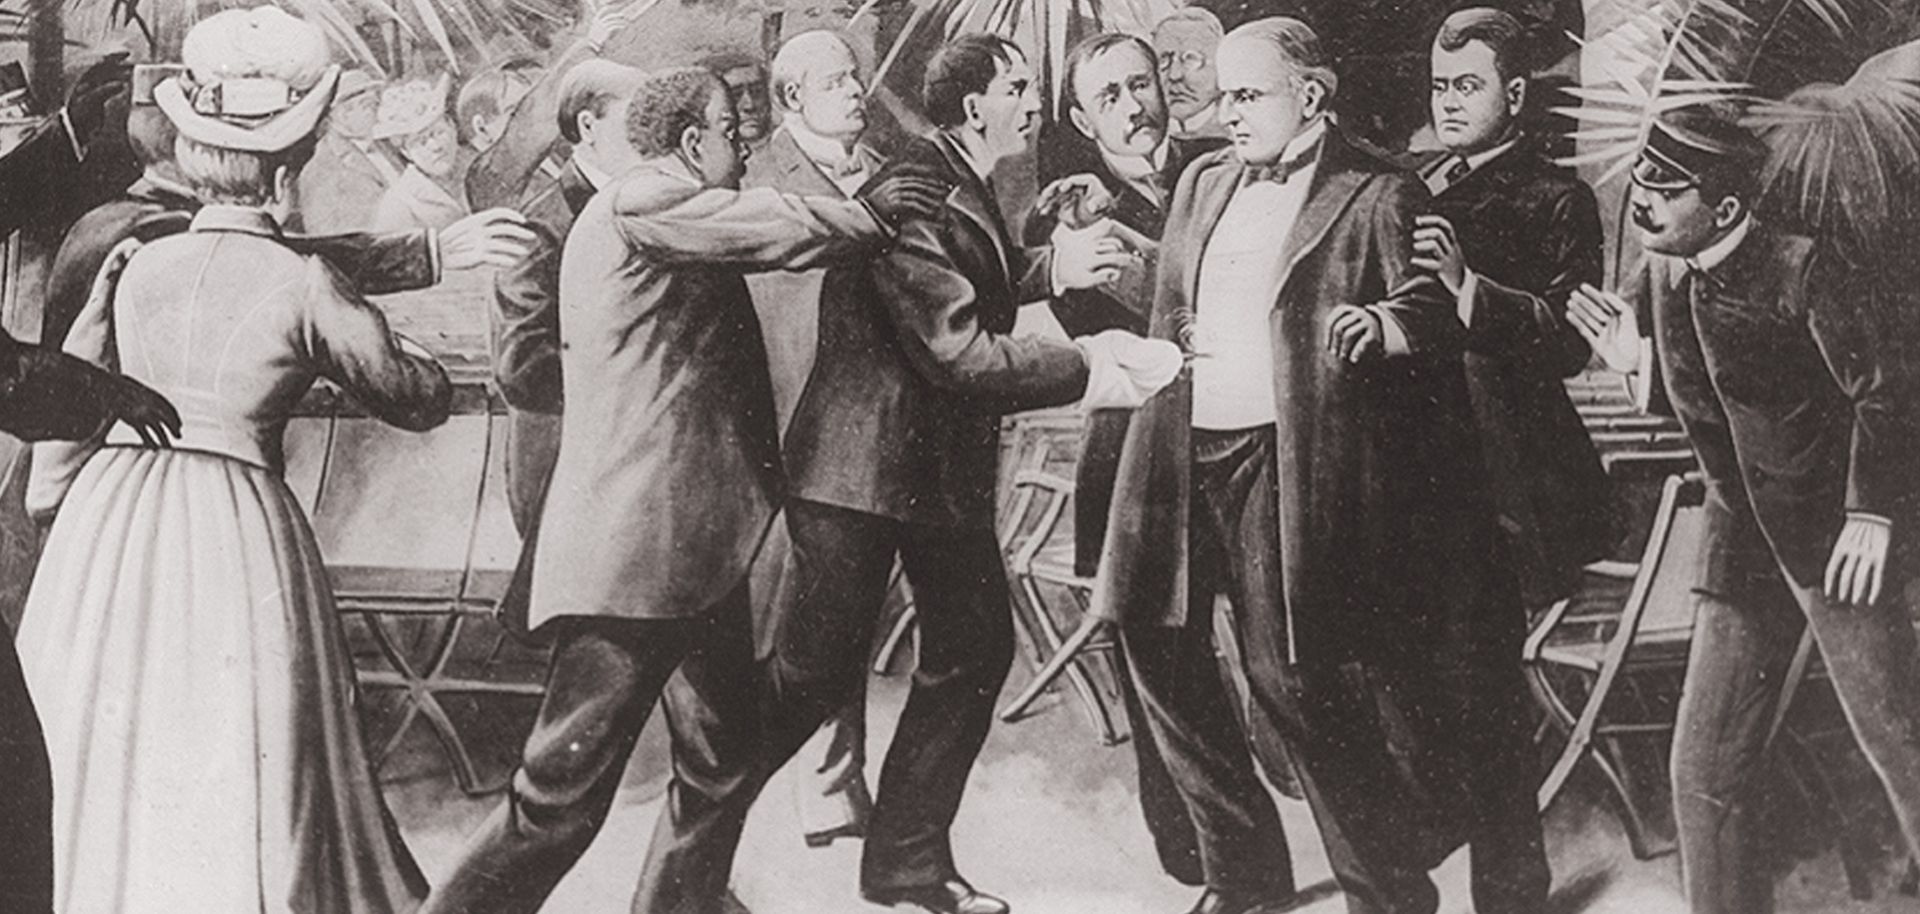 A representation of the assassination of President McKinley. During their heyday, anarchists managed to assassinate a number of world leaders. Jihadists share similar ambitions but so far have fallen short.